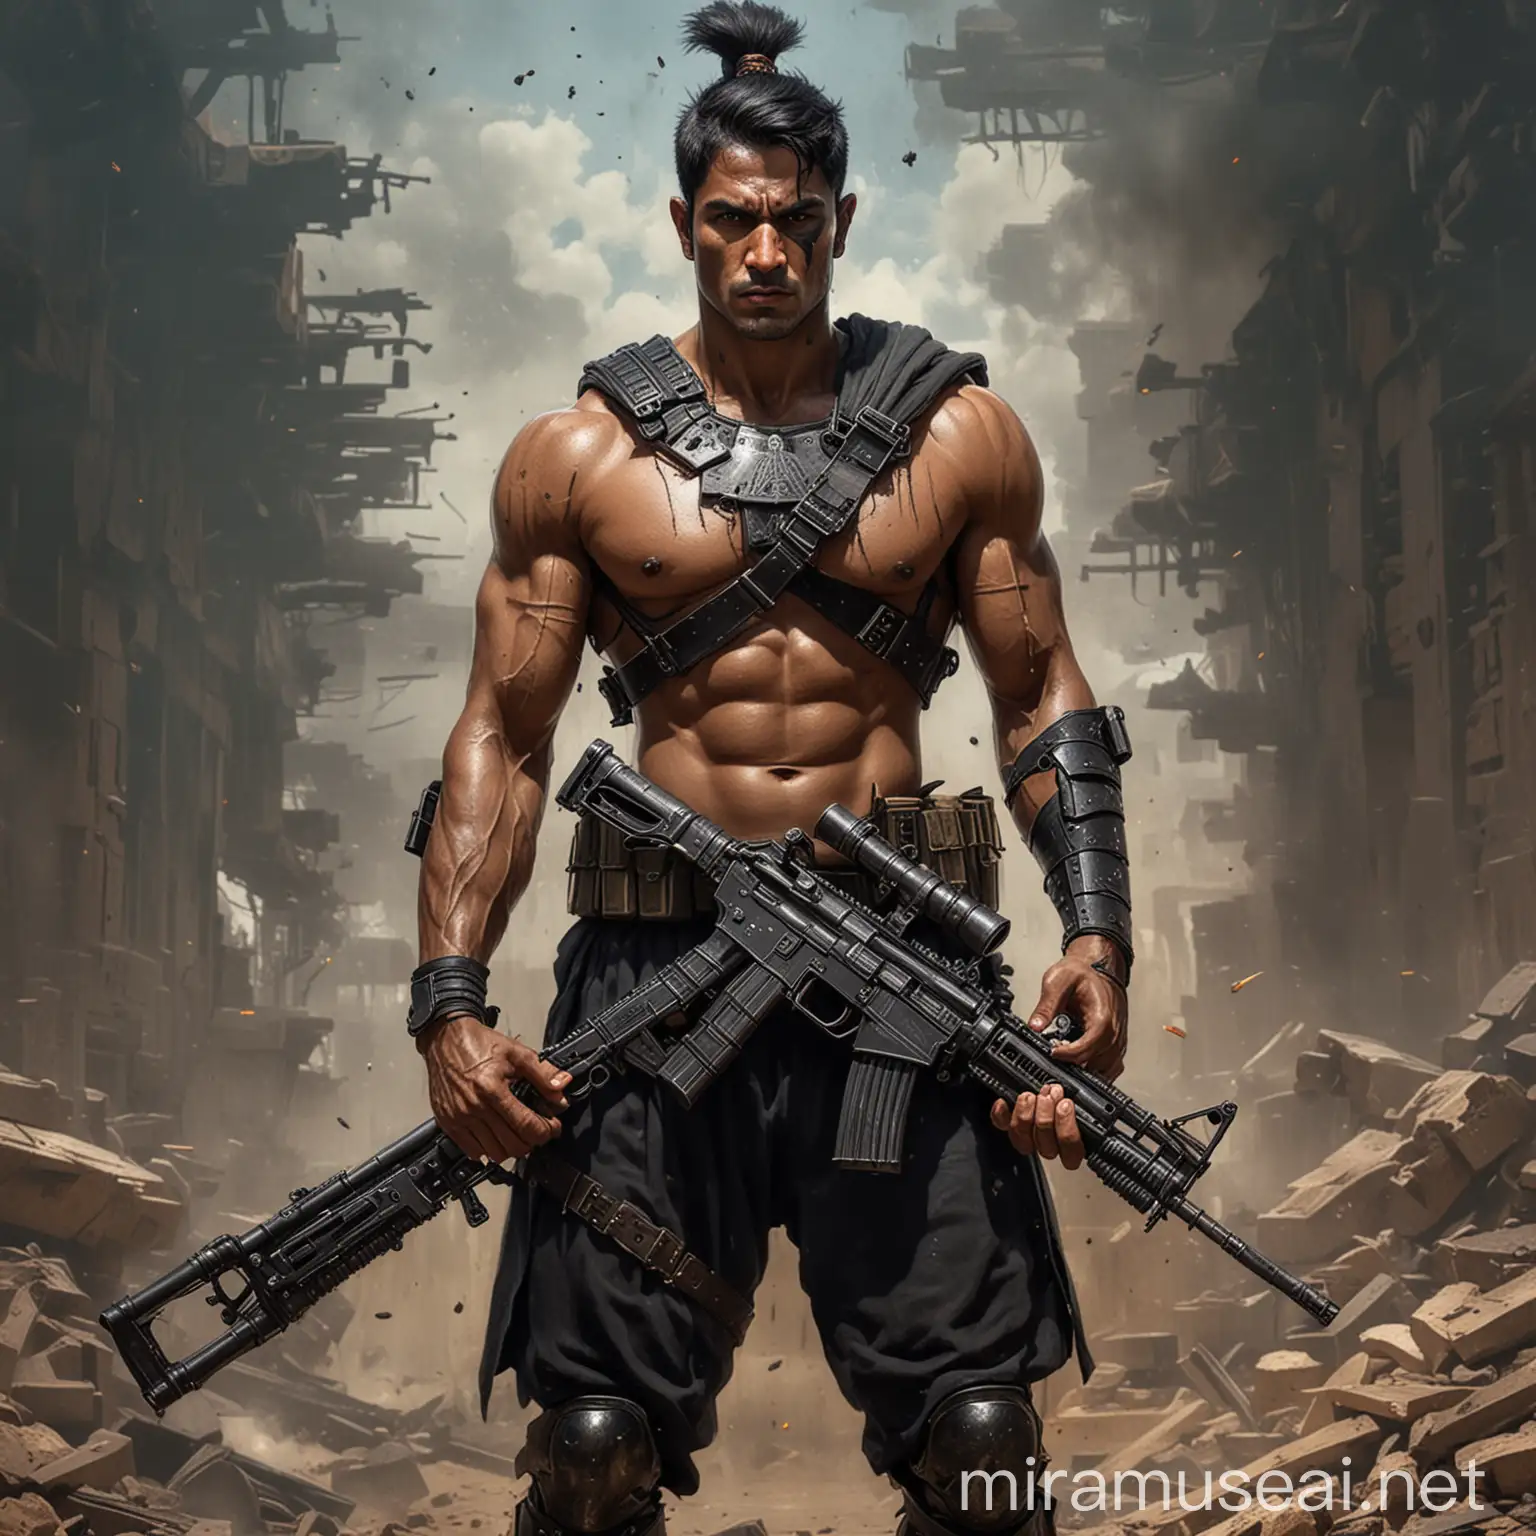 IndoGrecoSpartan Warrior Armed with Machine Guns and Cigarettes